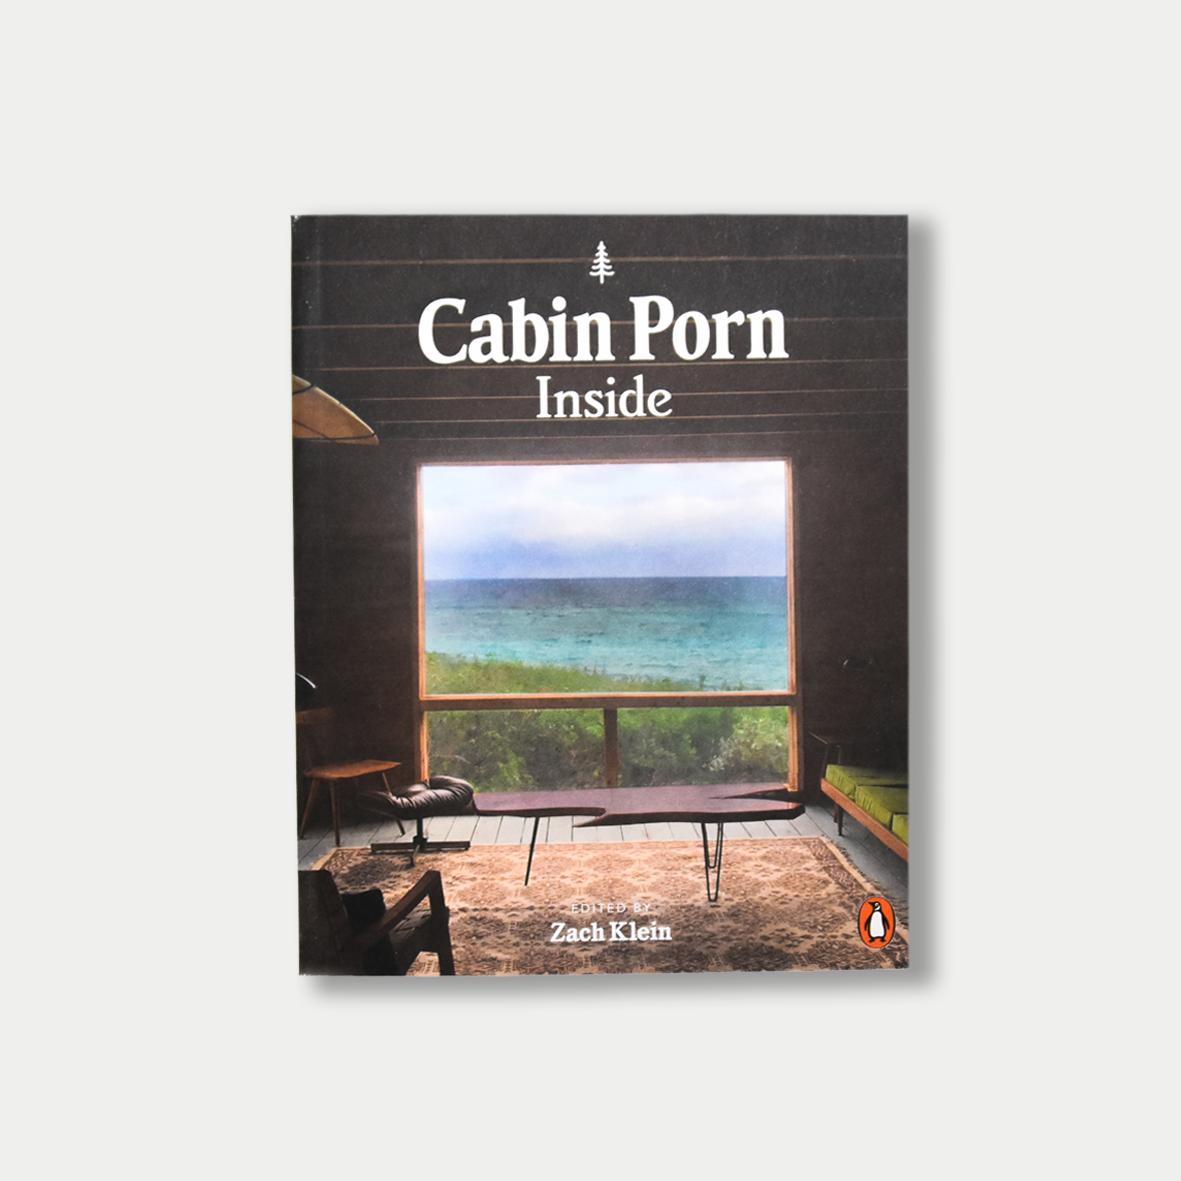 Book Cabin Porn Inside edited by Zach Klein sold at inzine homeware, lifestyle, books, gifts and mindful products New Zealand